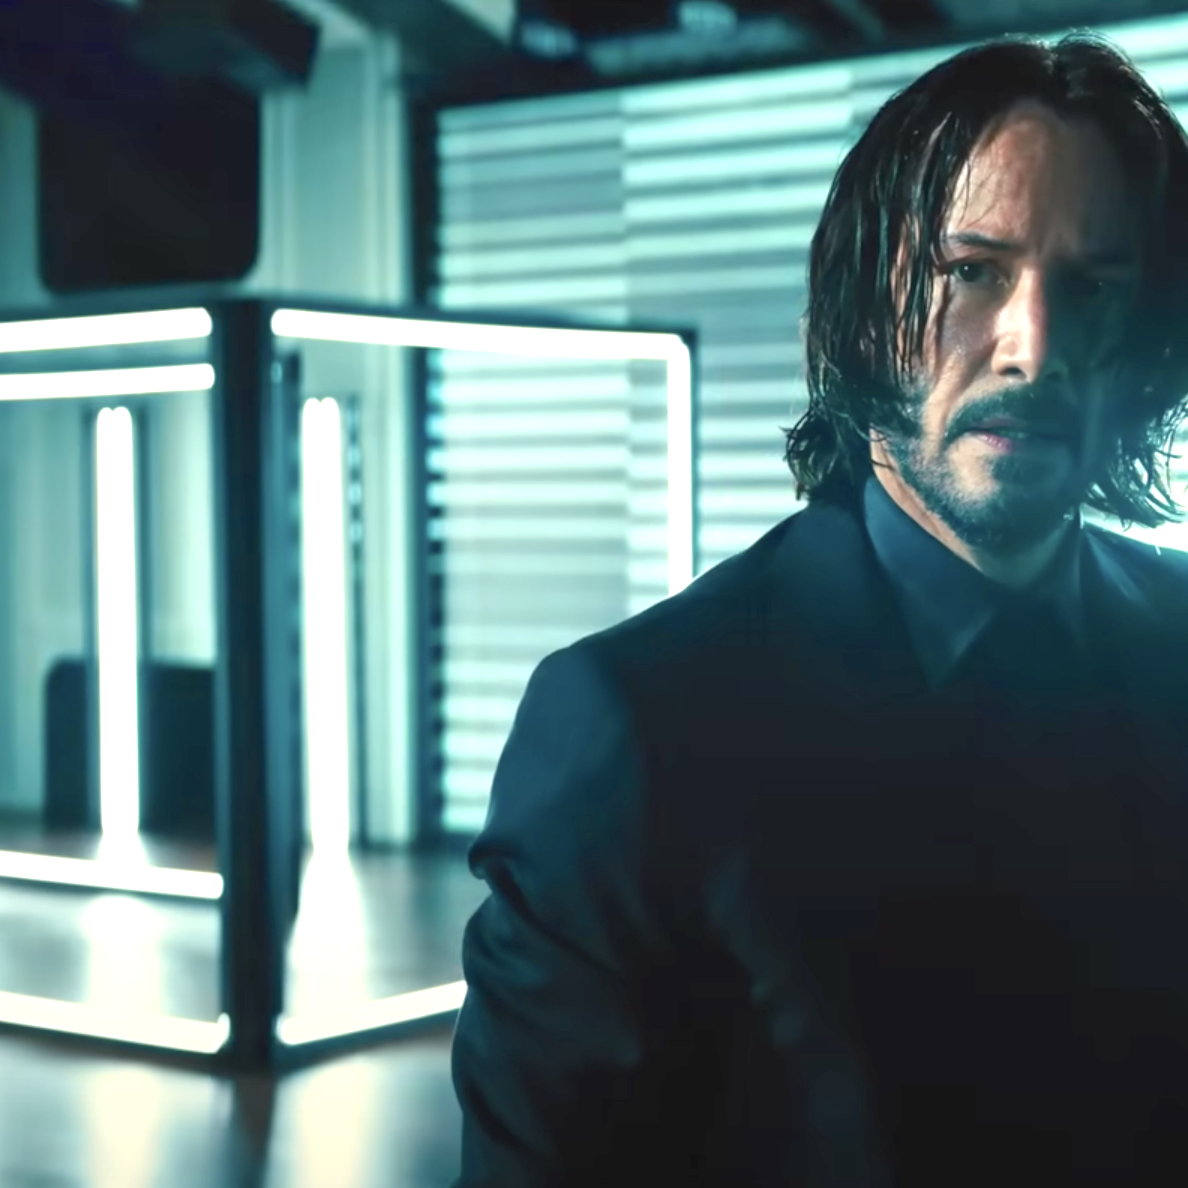 Is John Wick 5 Happening With Keanu Reeves? Here's The Latest From